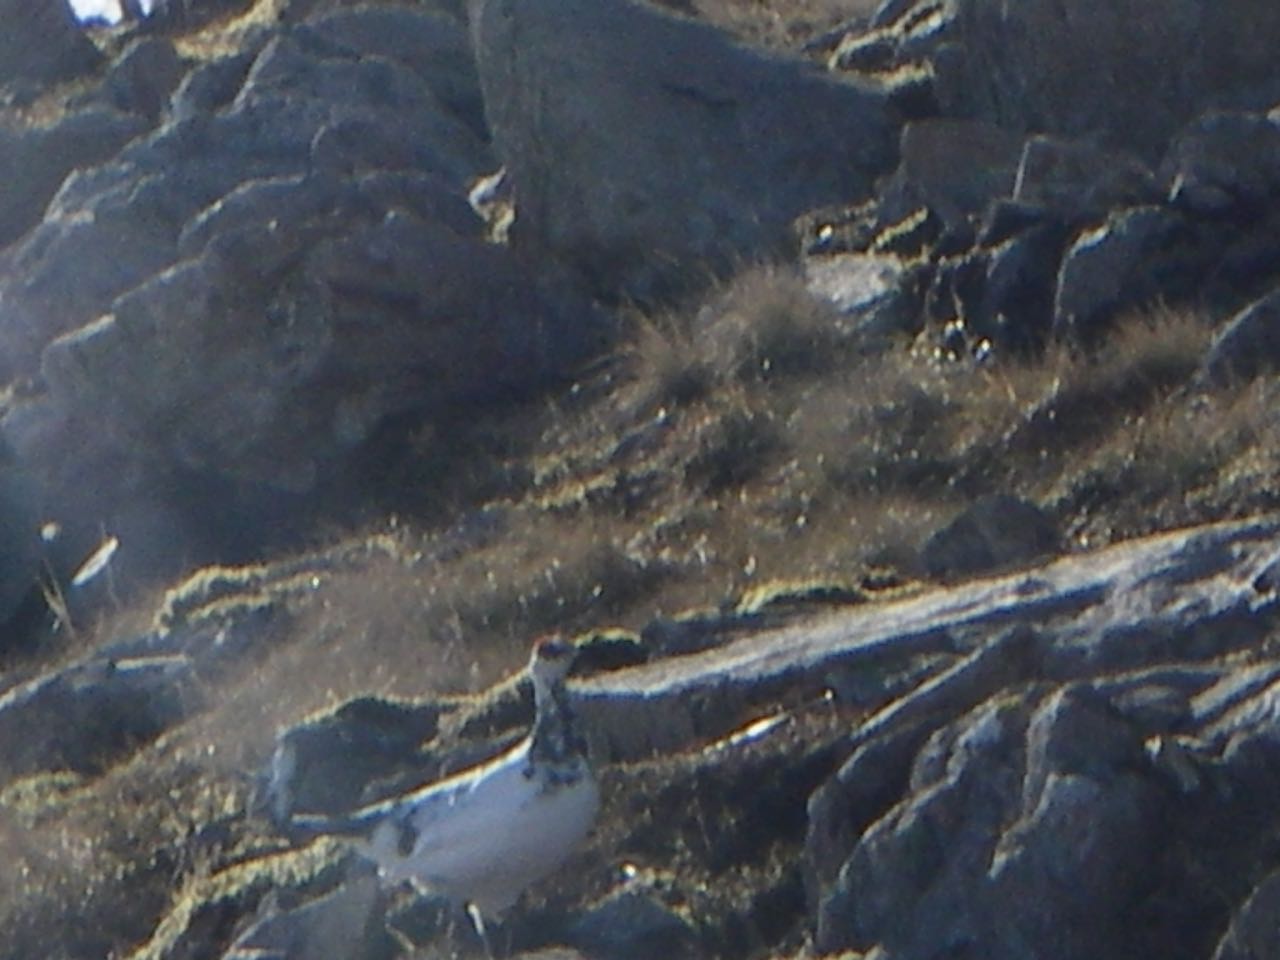 That friendly (and slightly disorientated) ptarmigan